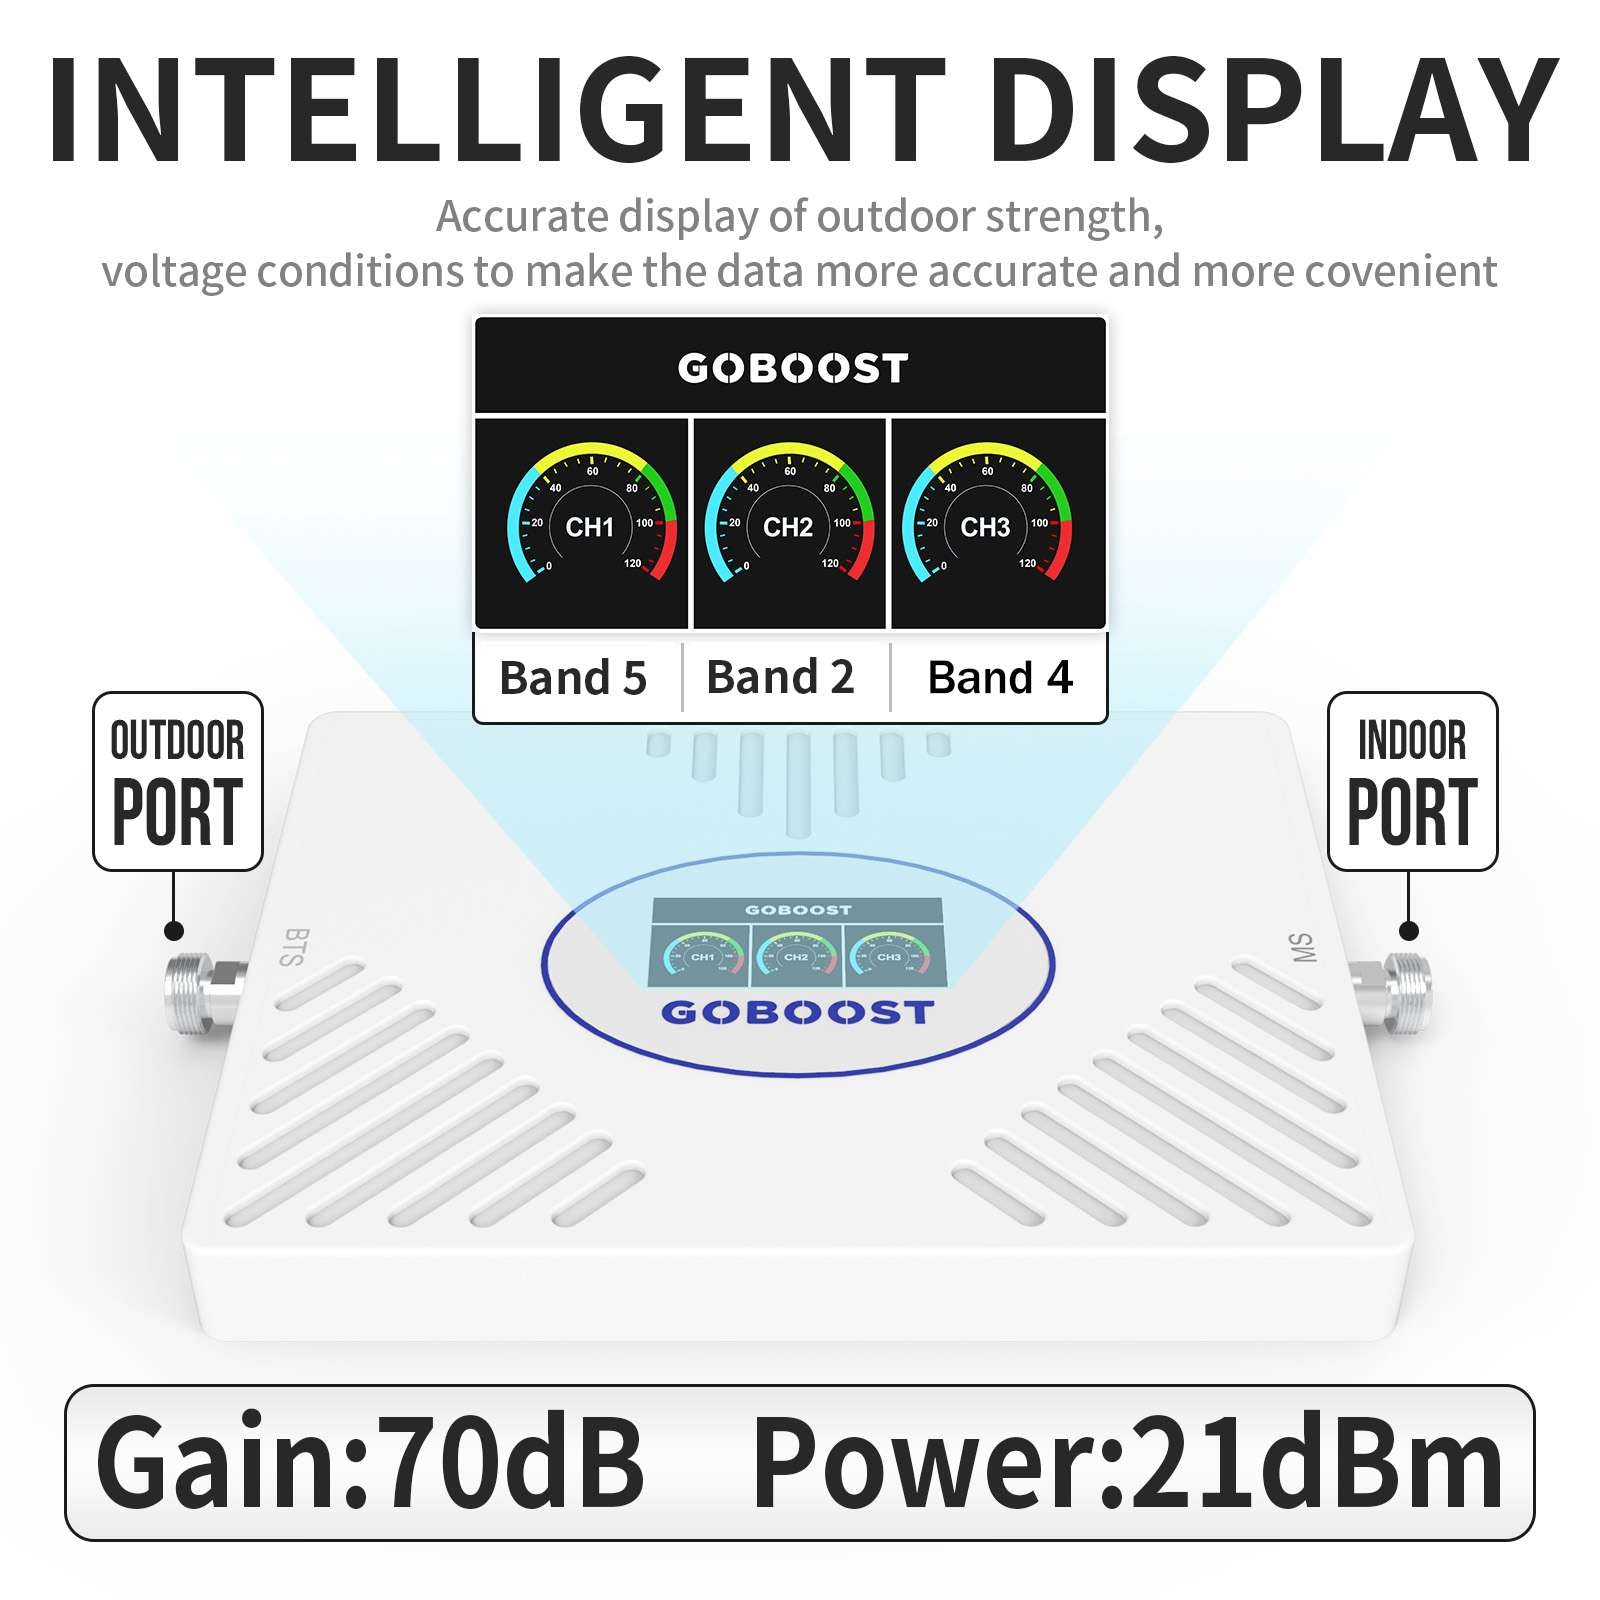 GOBOOST Cell Phone Signal Booster with Intelligent Display